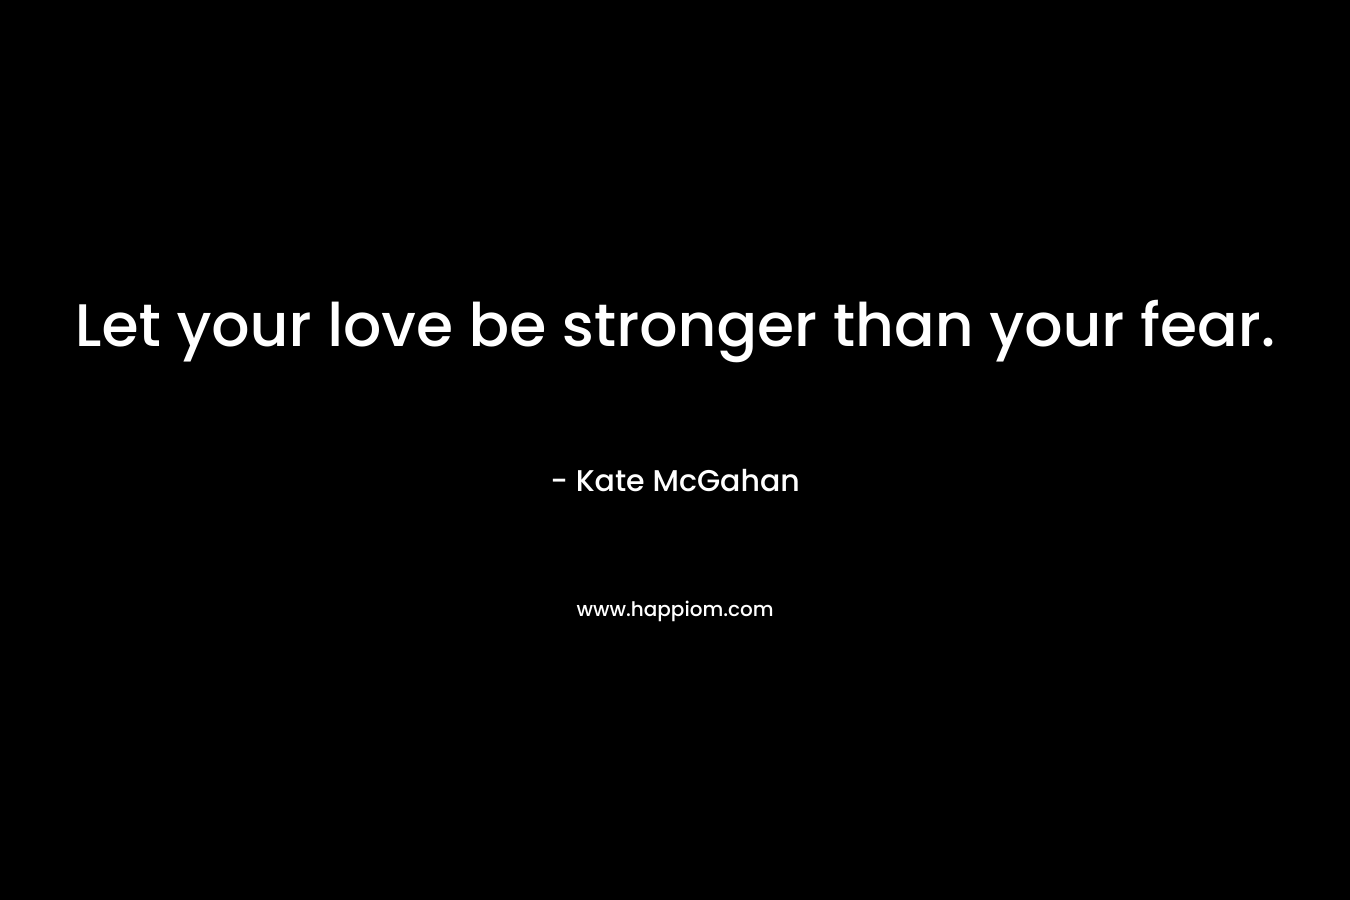 Let your love be stronger than your fear.